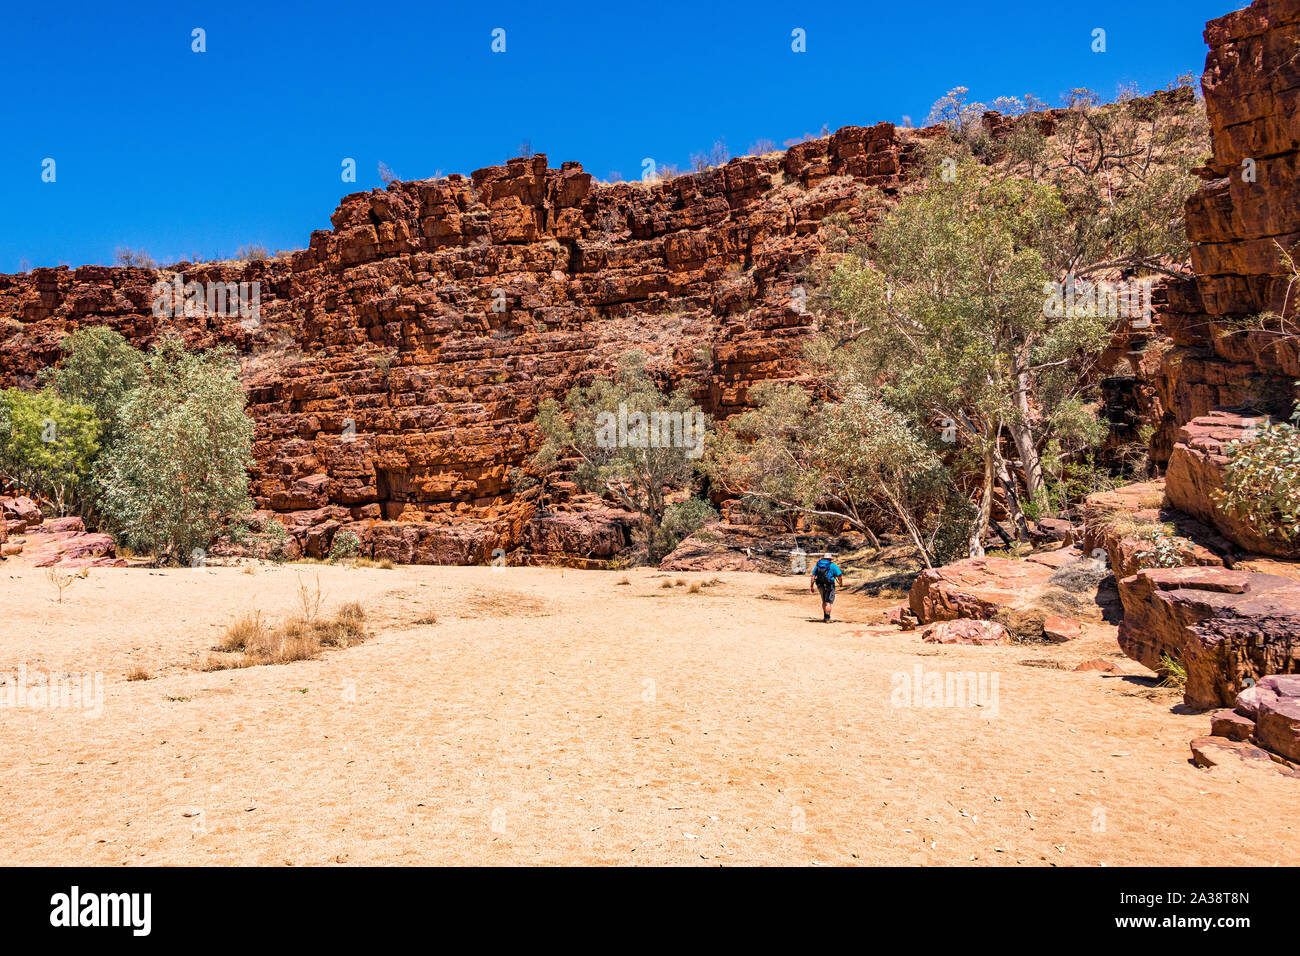 A male hiker in the Australian outback at Trephina Gorge, East MacDonnell Ranges, in the Northern Territory, Australia Stock Photo